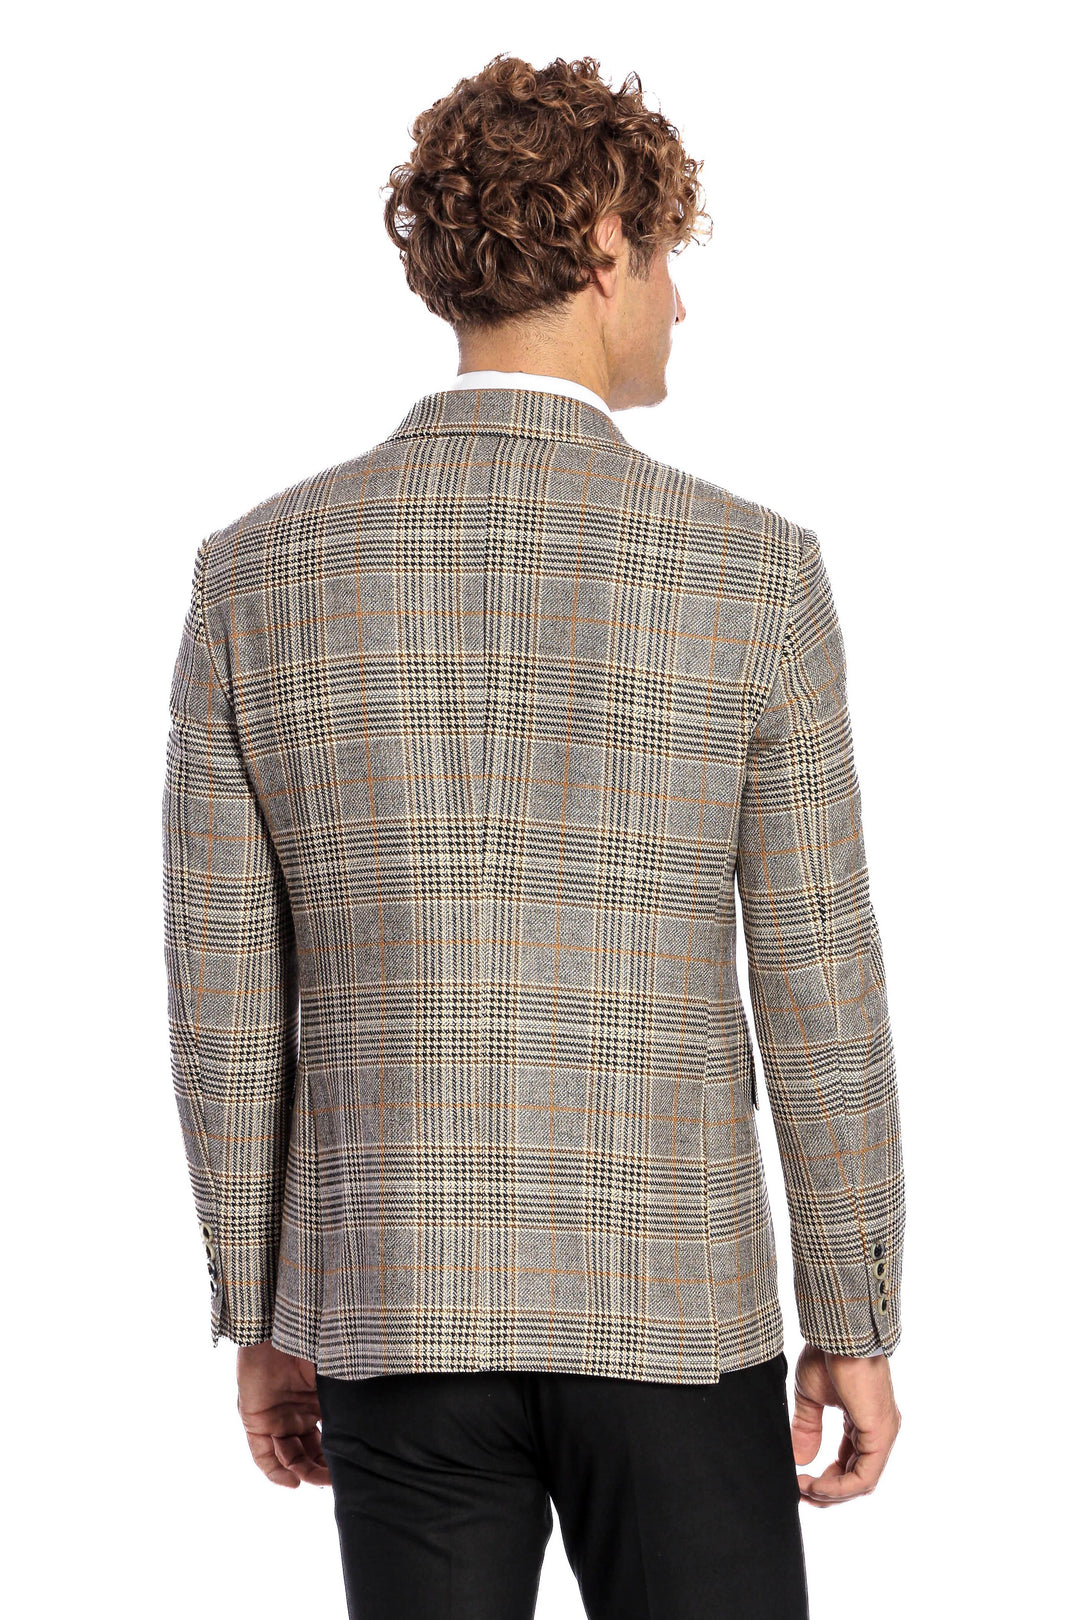 Double Breasted Checked Grey Men Blazer - Wessi